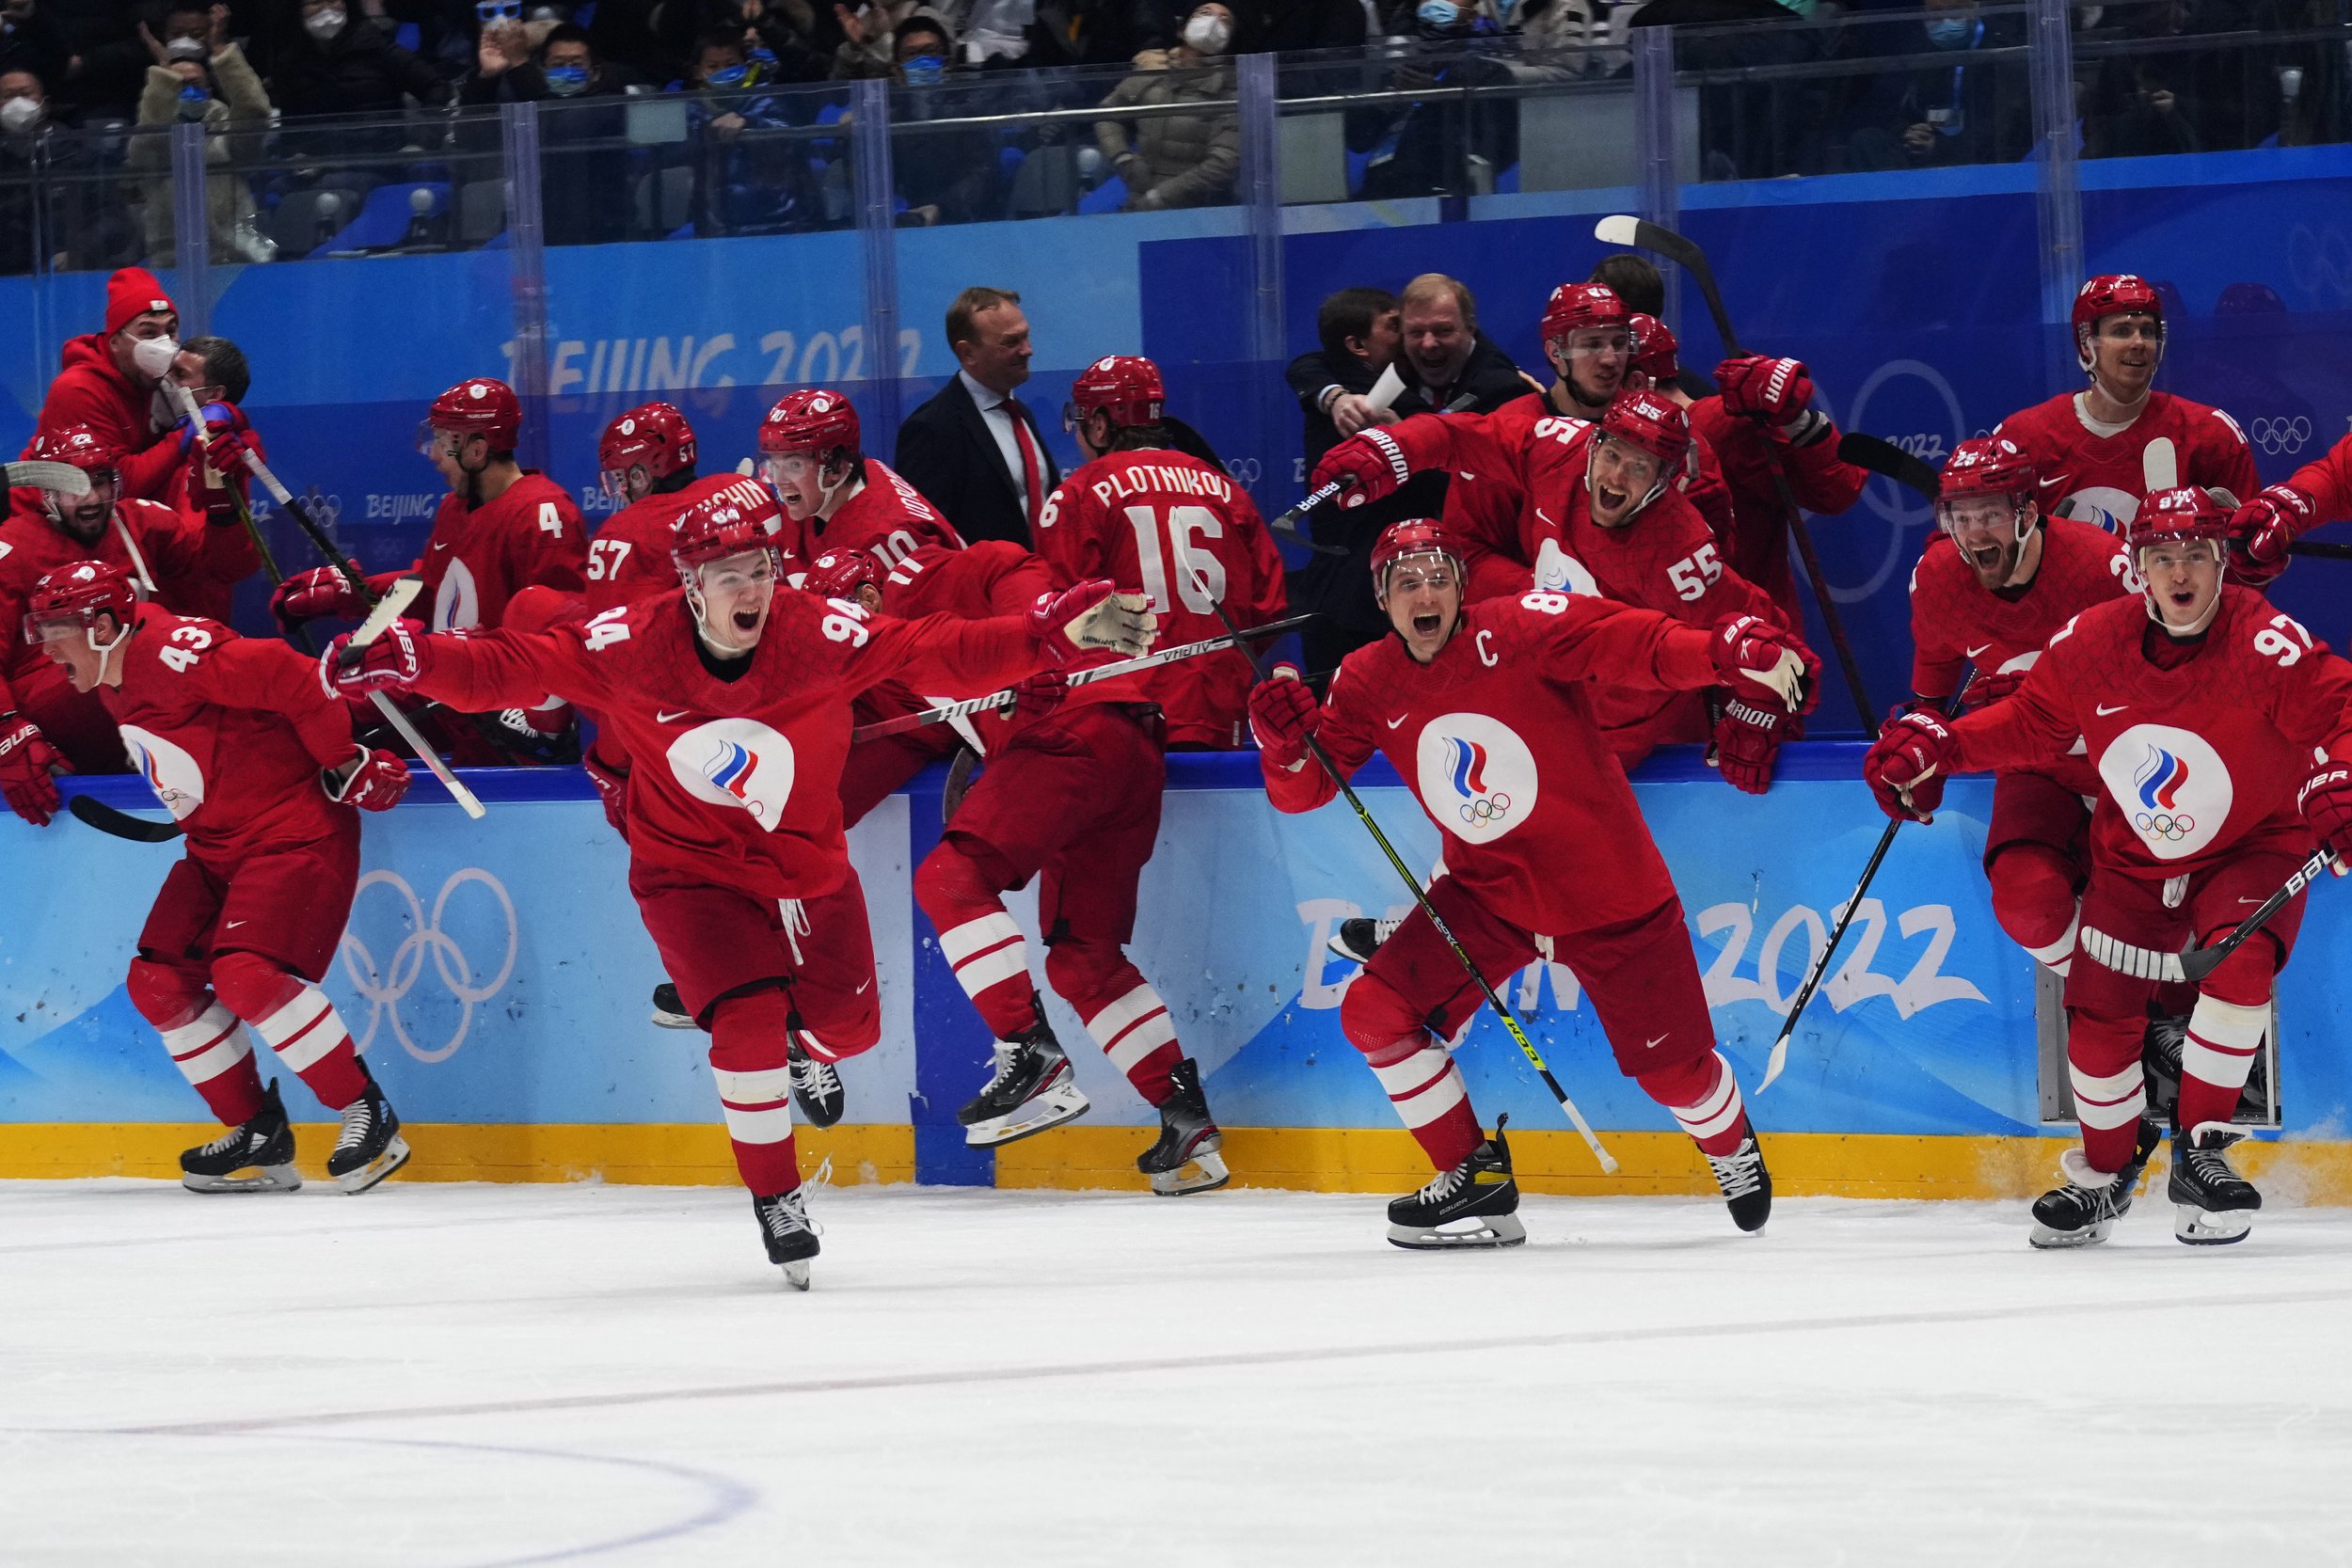  The Russian Olympic Committee celebrates the winning goal by Arseni Gritsyuk during a shootout in a men's semifinal hockey game against Sweden at the 2022 Winter Olympics, Friday, Feb. 18, 2022, in Beijing. (AP Photo/Petr David Josek) 